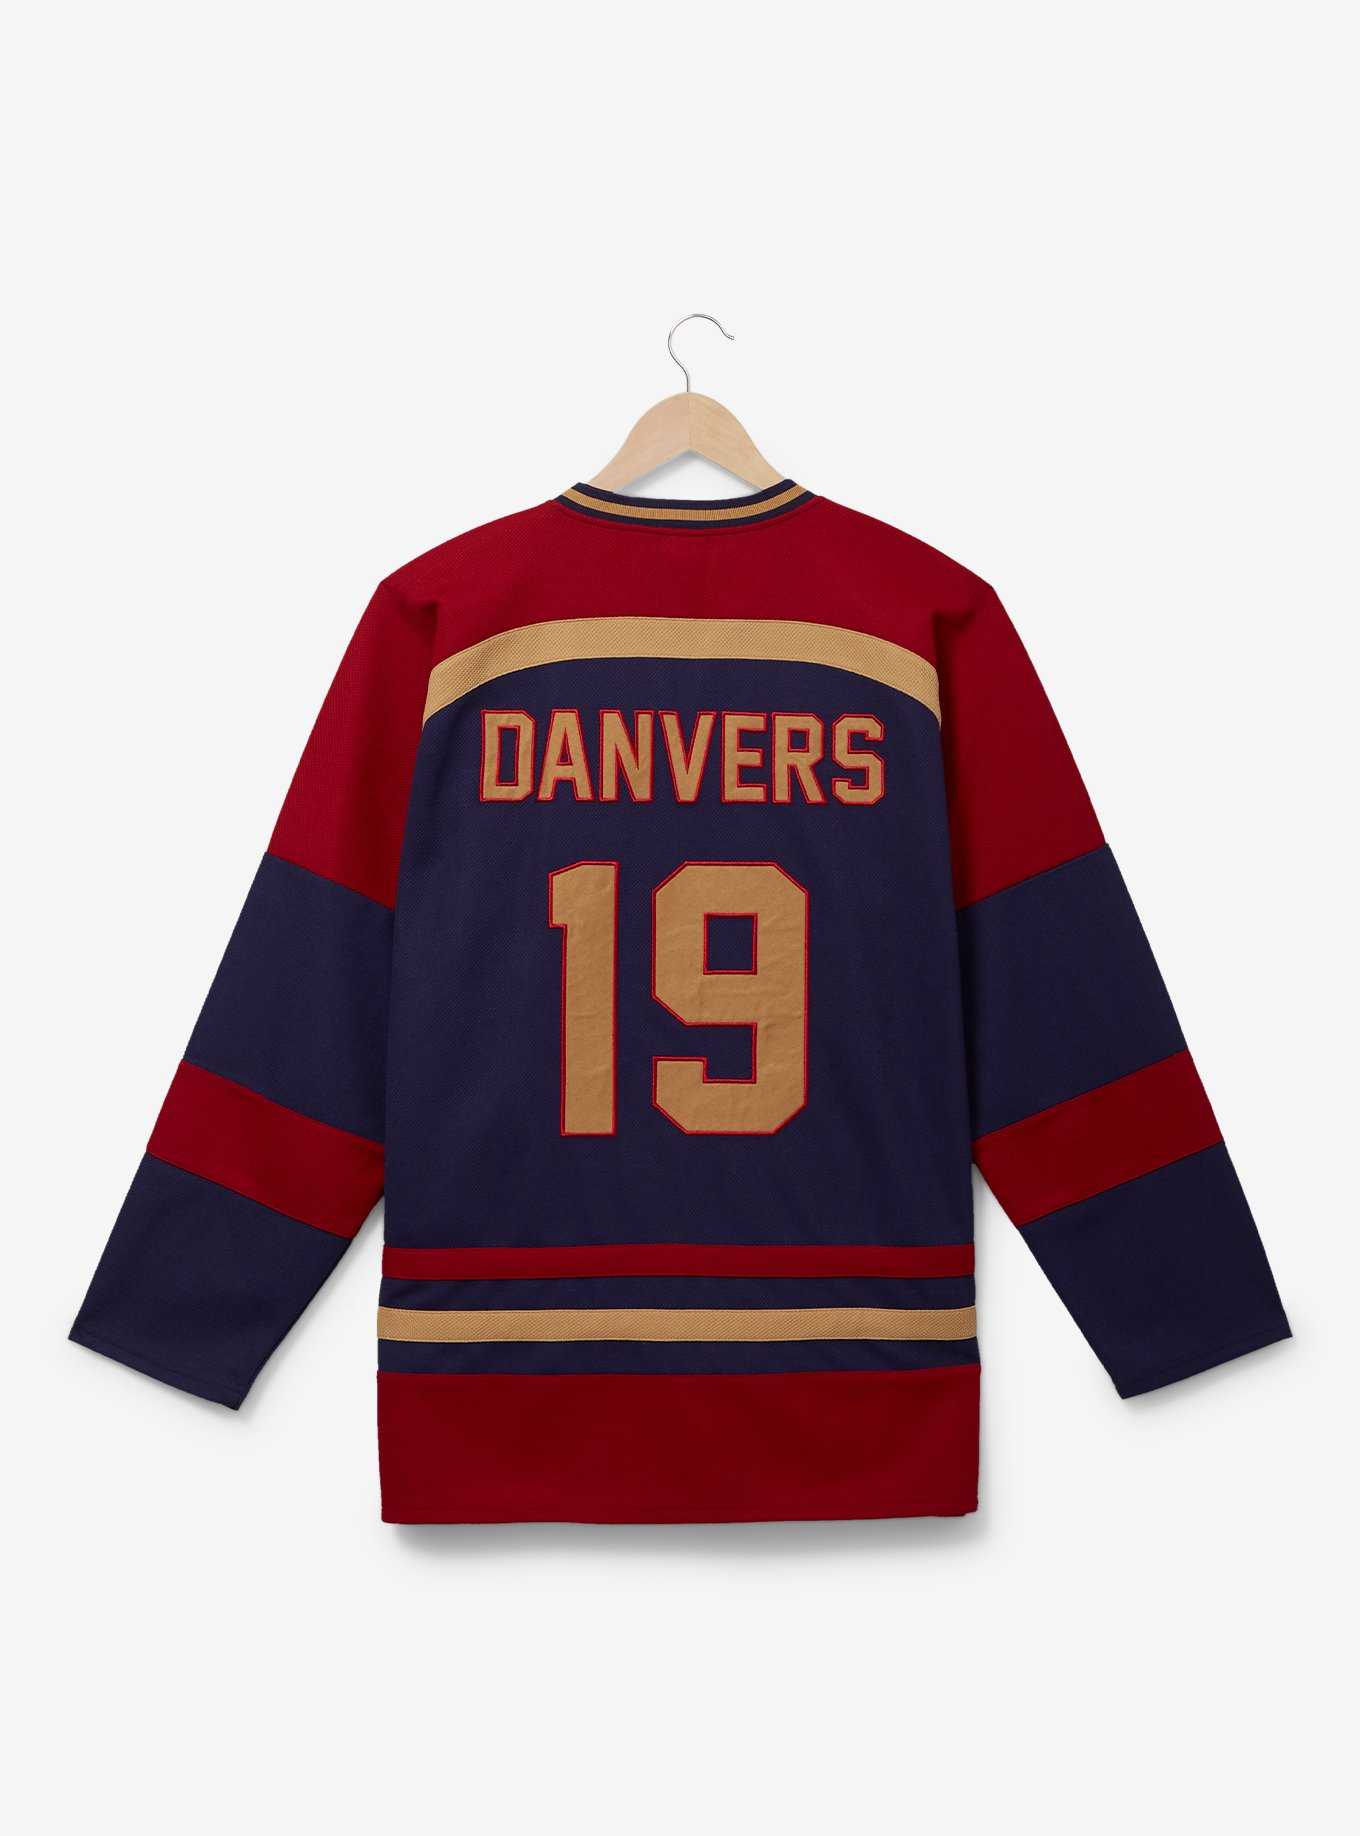 Marvel The Marvels Carol Danvers Hockey Jersey - BoxLunch Exclusive, , hi-res